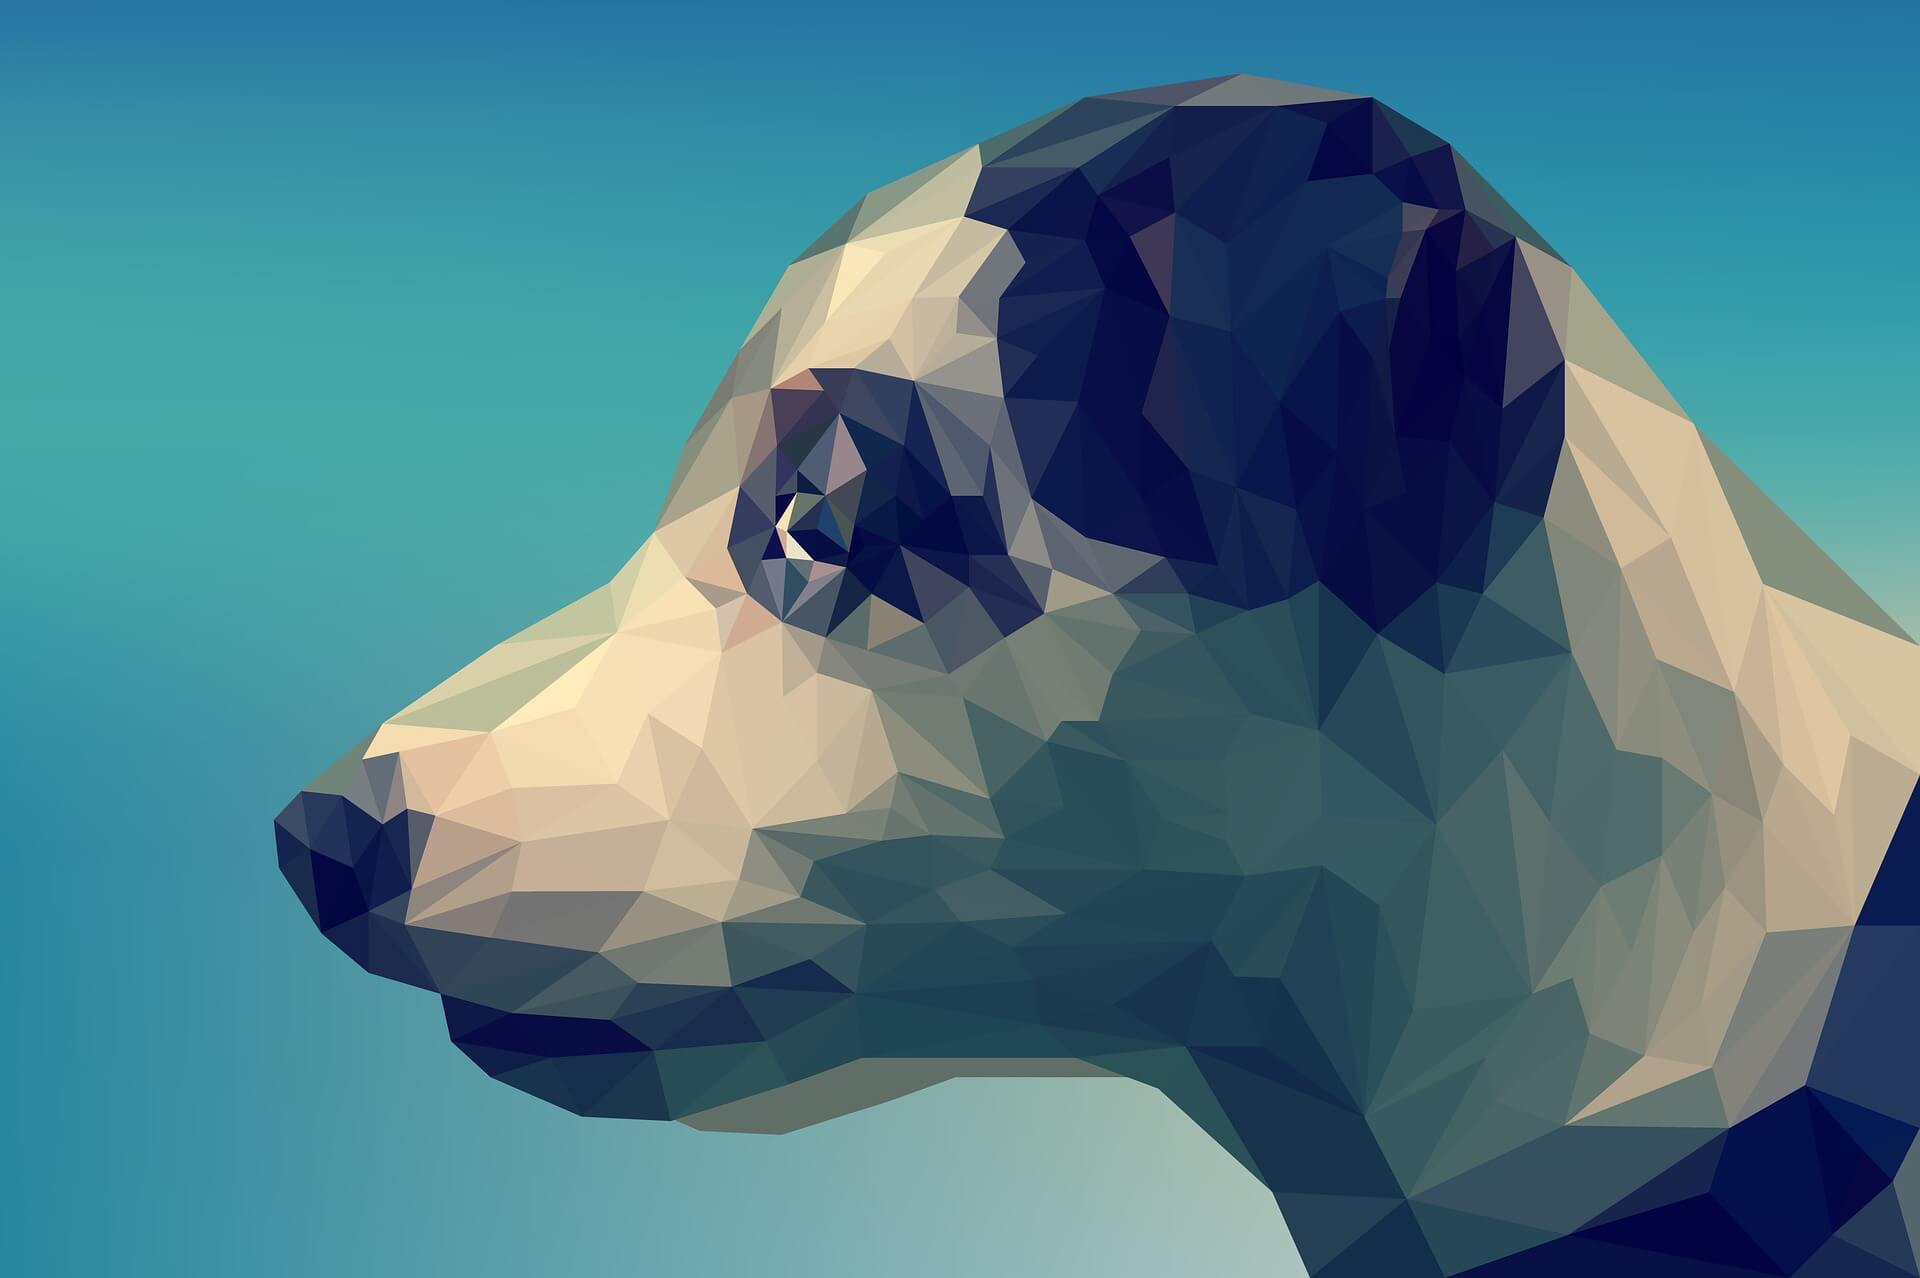 10 Vectorized Animals for Sketch